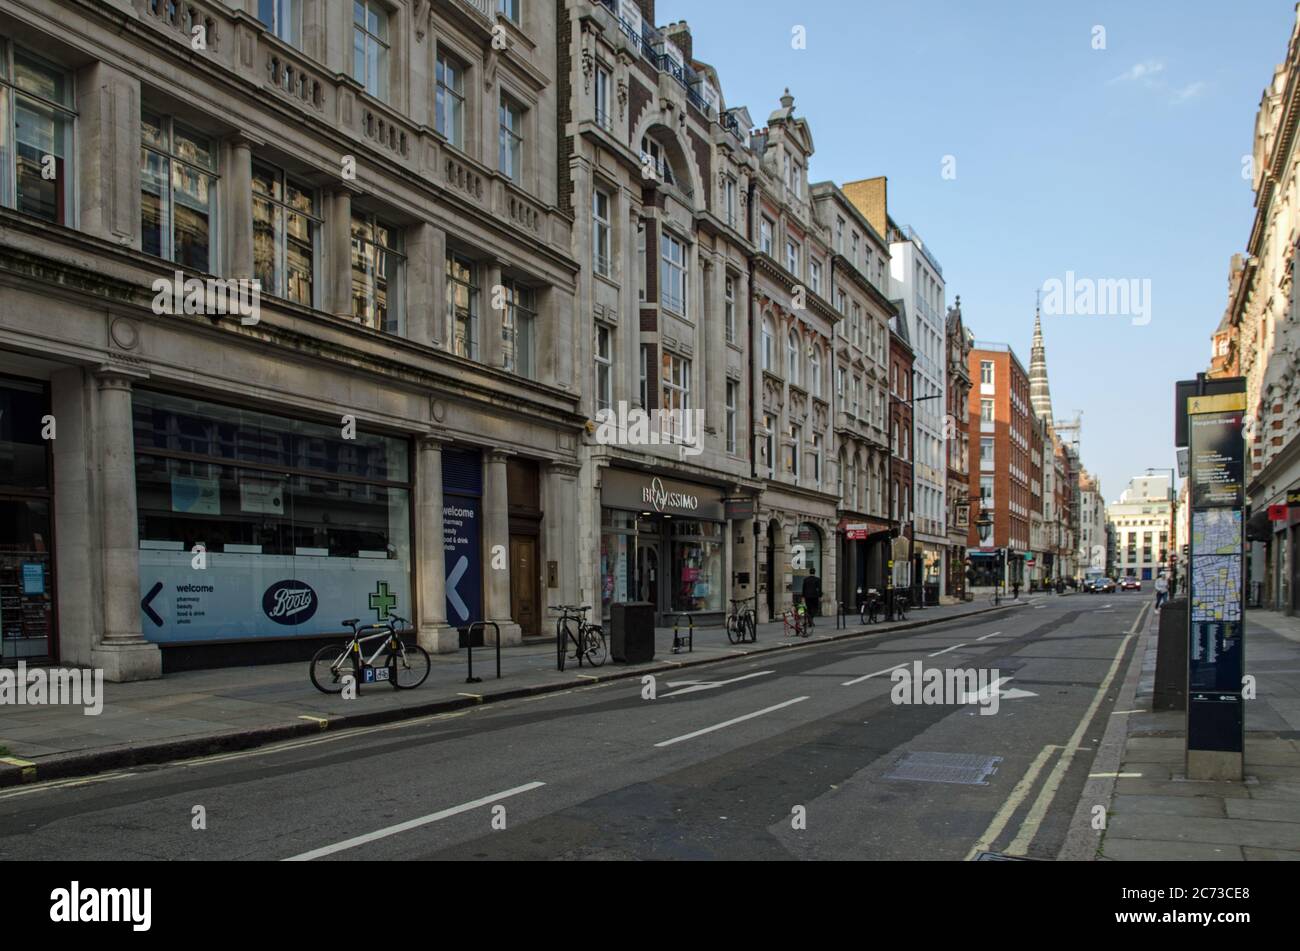 London, UK - April 24, 2020:  Shops and cafes on Little Portland Street in the Fitzrovia district of central London on a late Spring day. Stock Photo